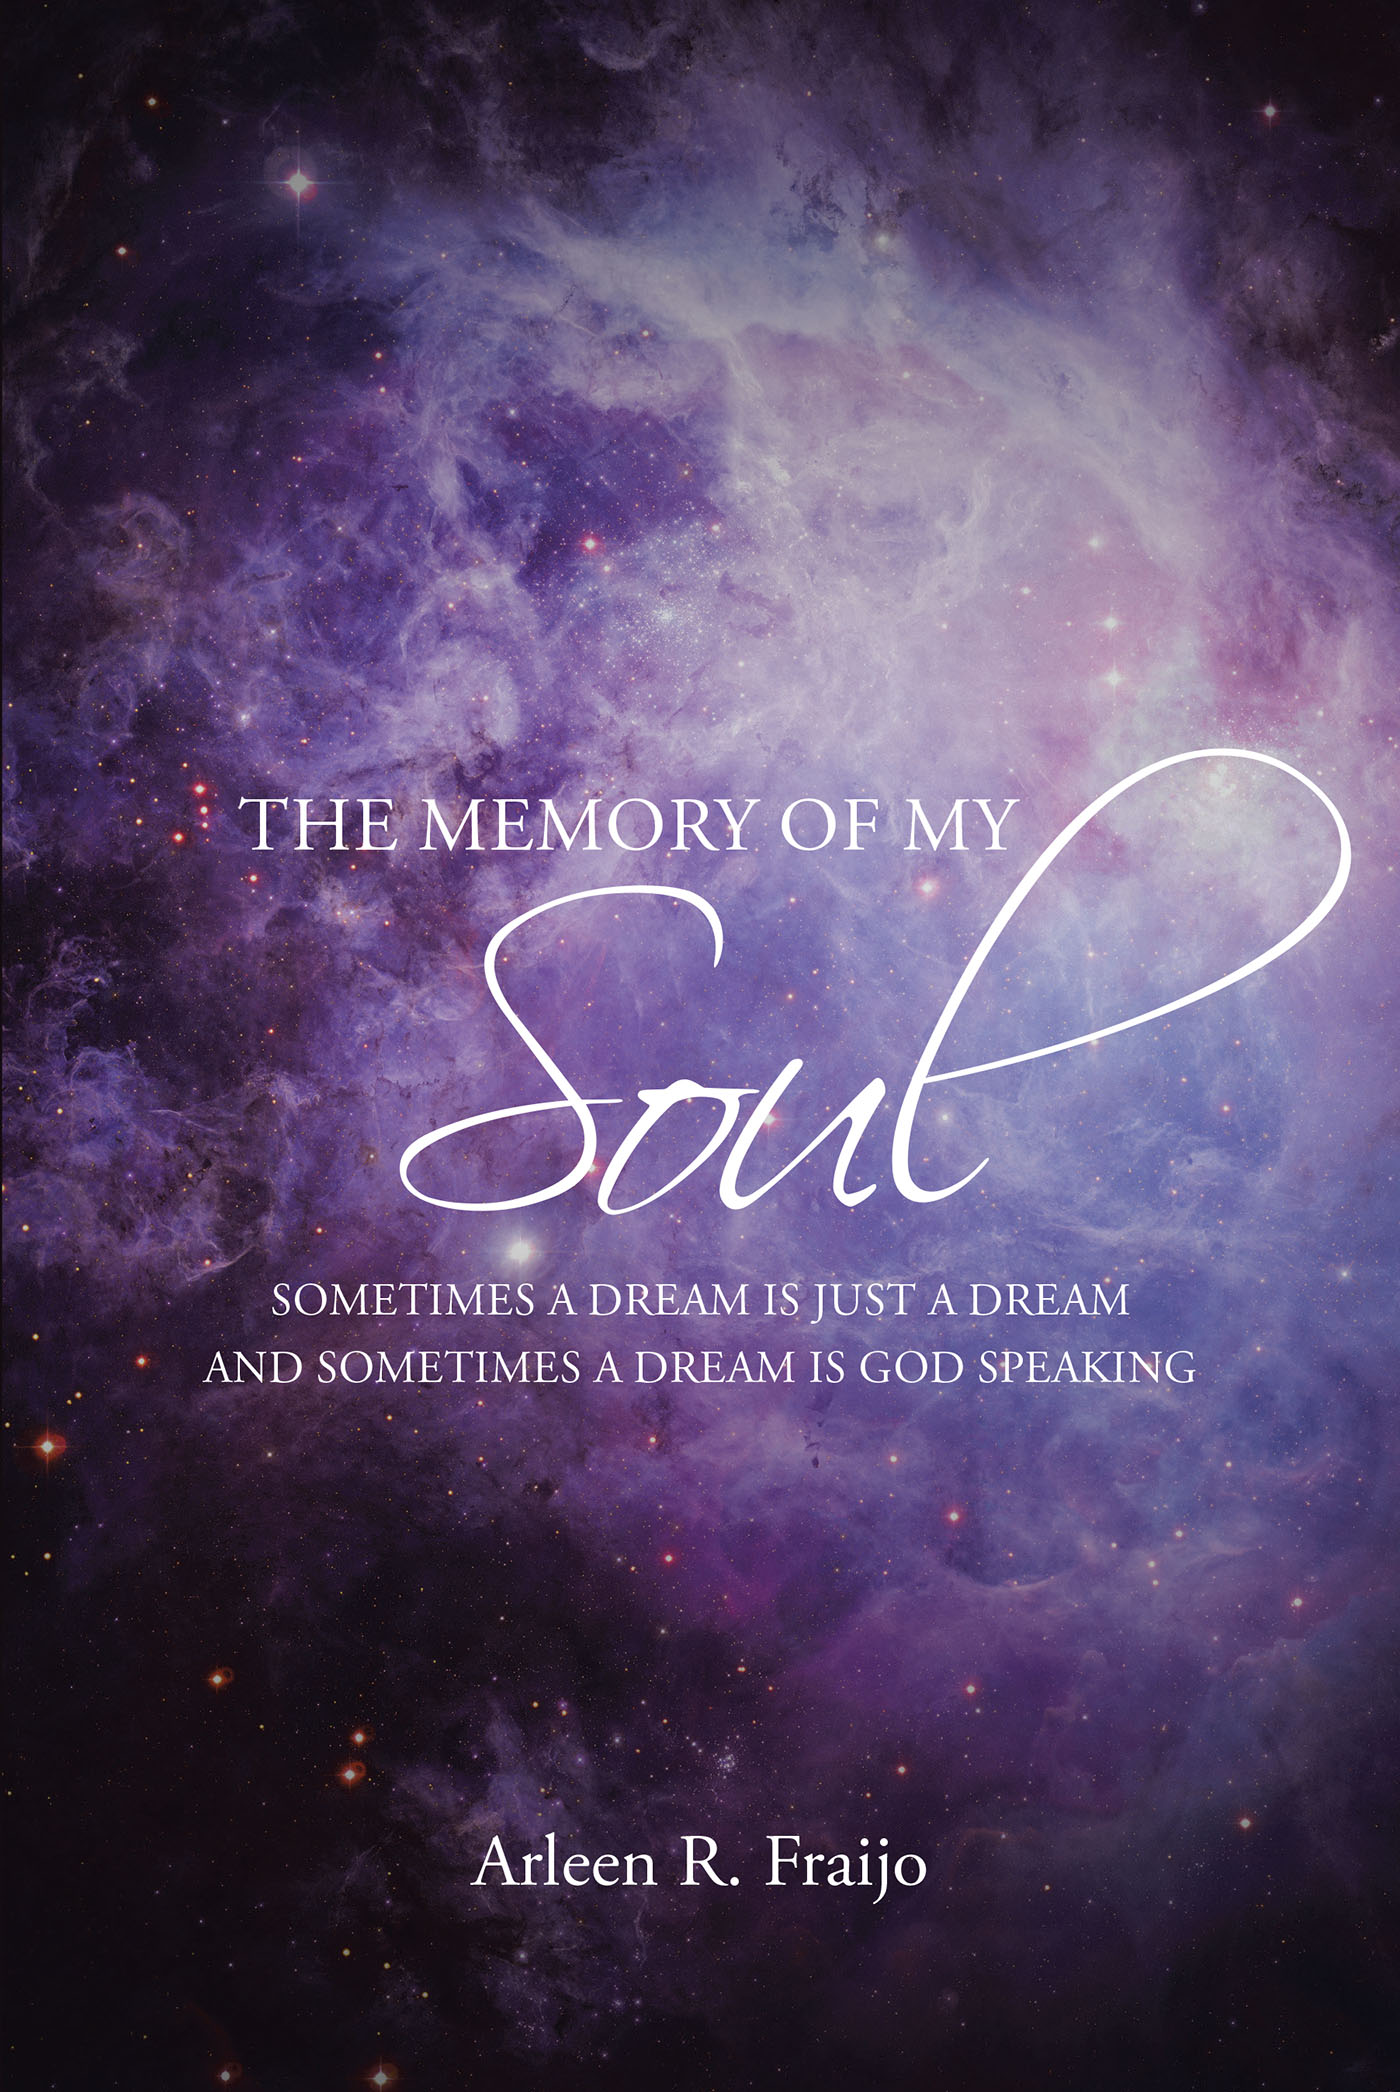 Arleen R. Fraijo’s Newly Released "The Memory Of My Soul" is a Thoughtful Arrangement of Poetry and Personal Experiences